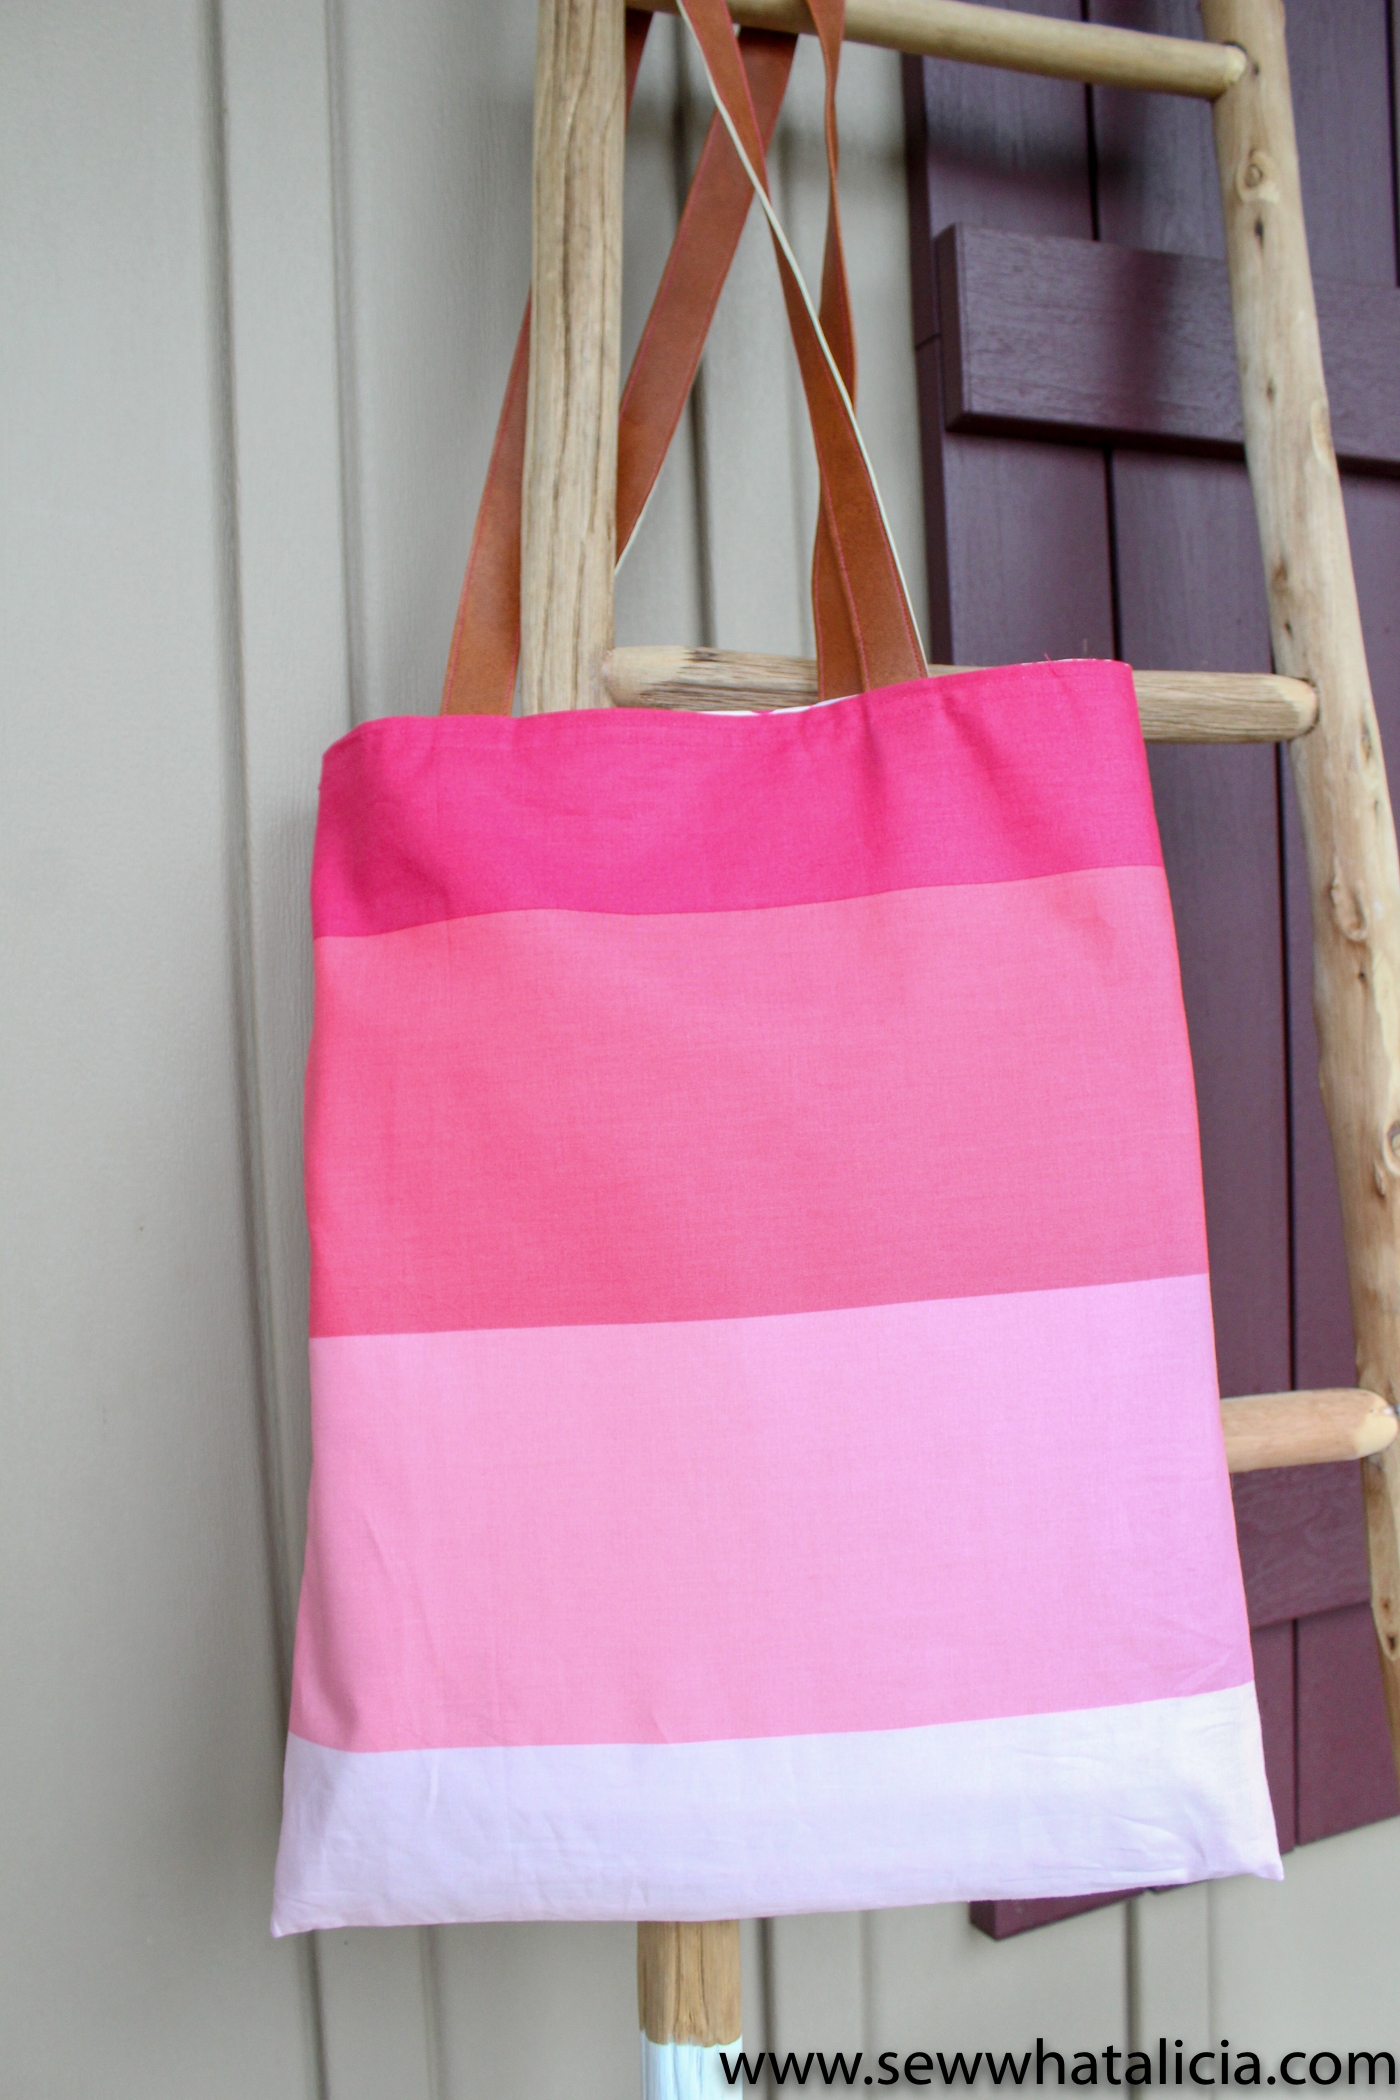 How to make a tote bag: Finished beauty shot of tote hanging on ladder. | www.sewwhatalicia.com